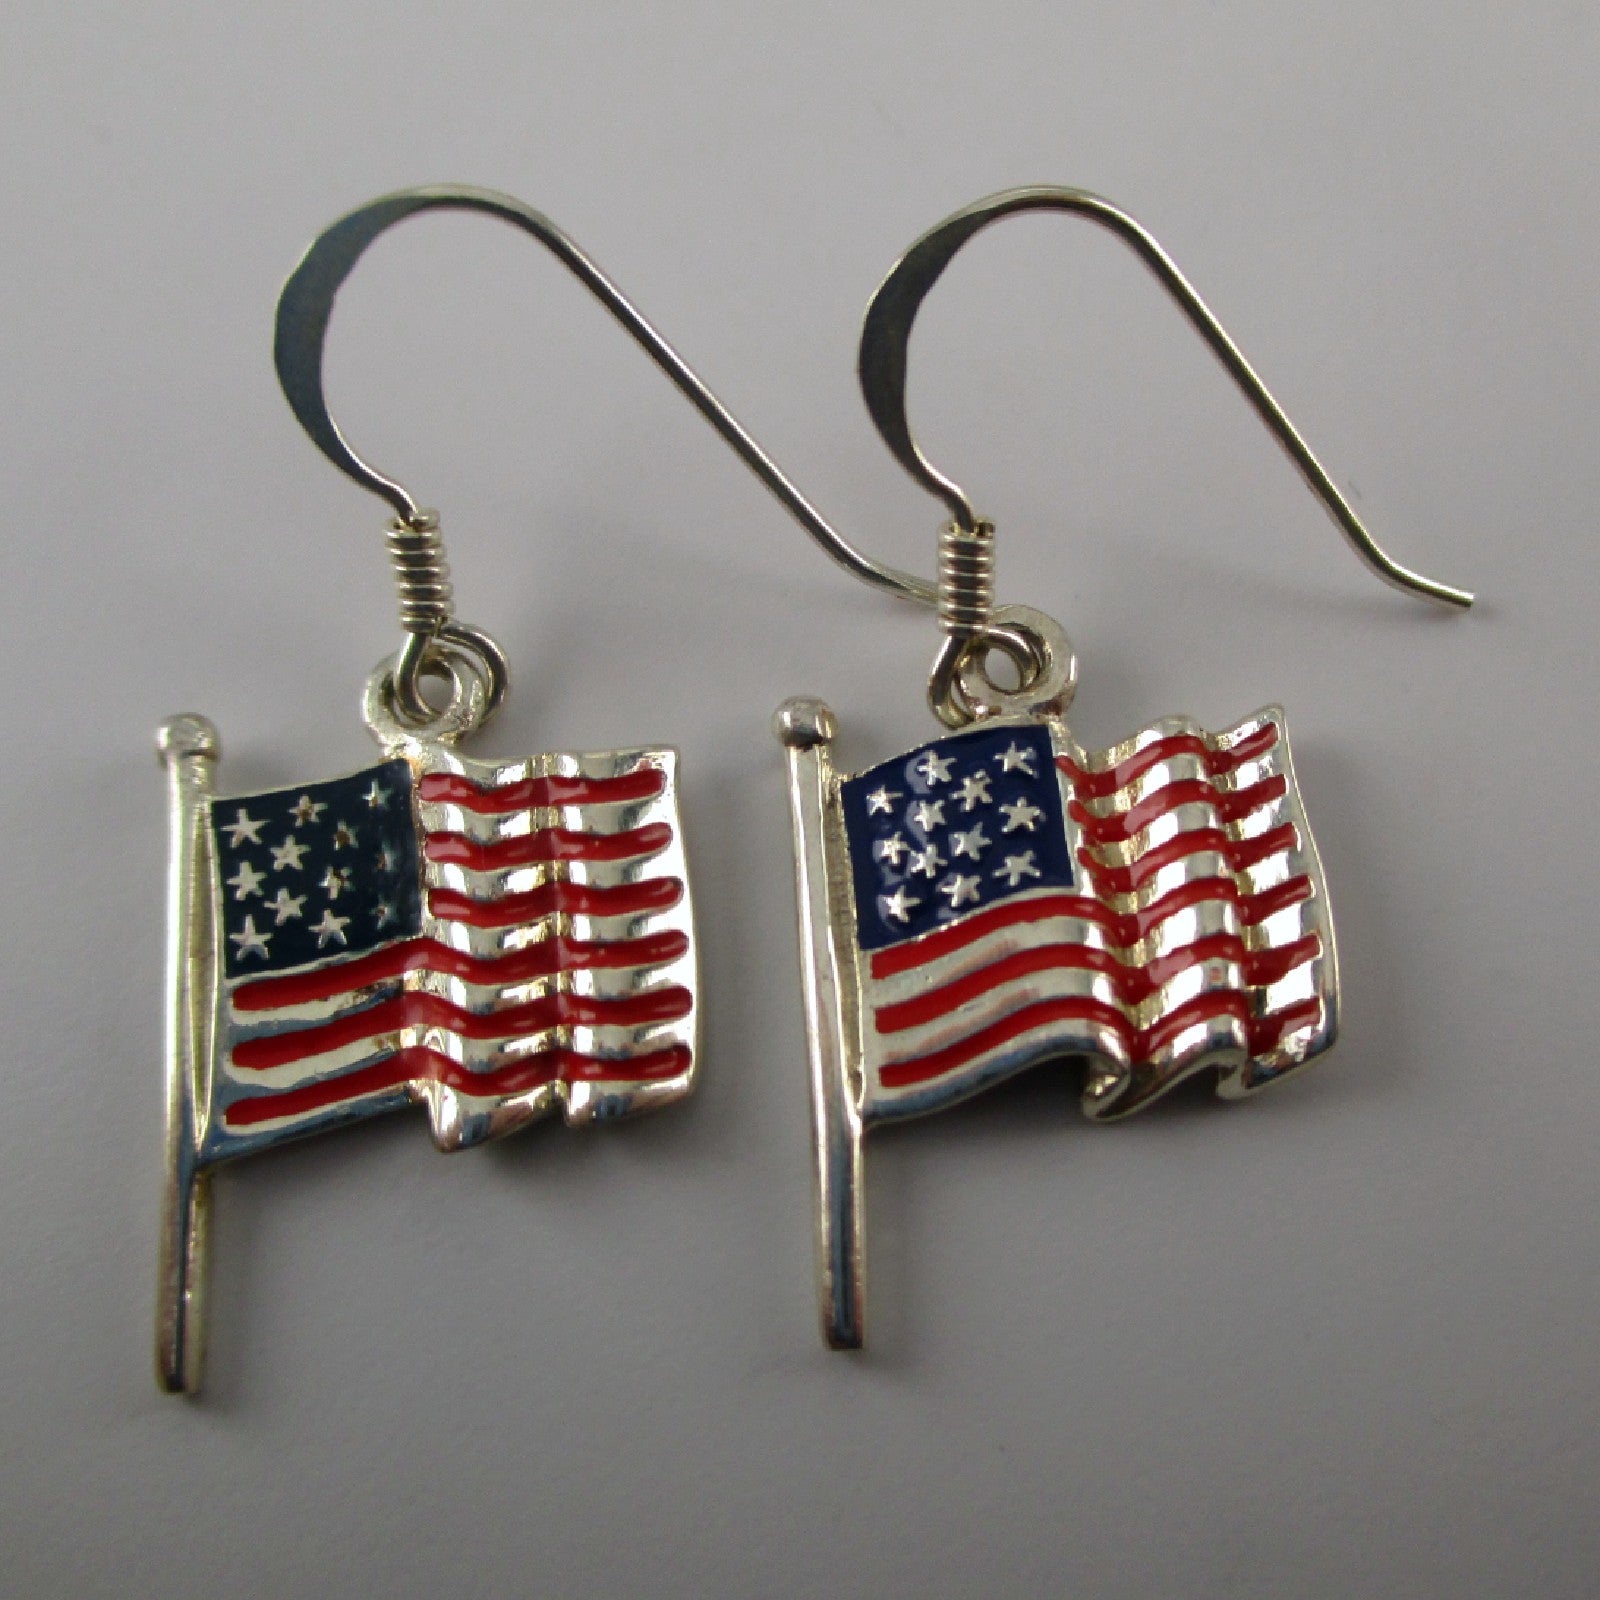 Buddy G's Small Patriotic American Flag Pierced Earrings, Red/White/Blue at  Tractor Supply Co.